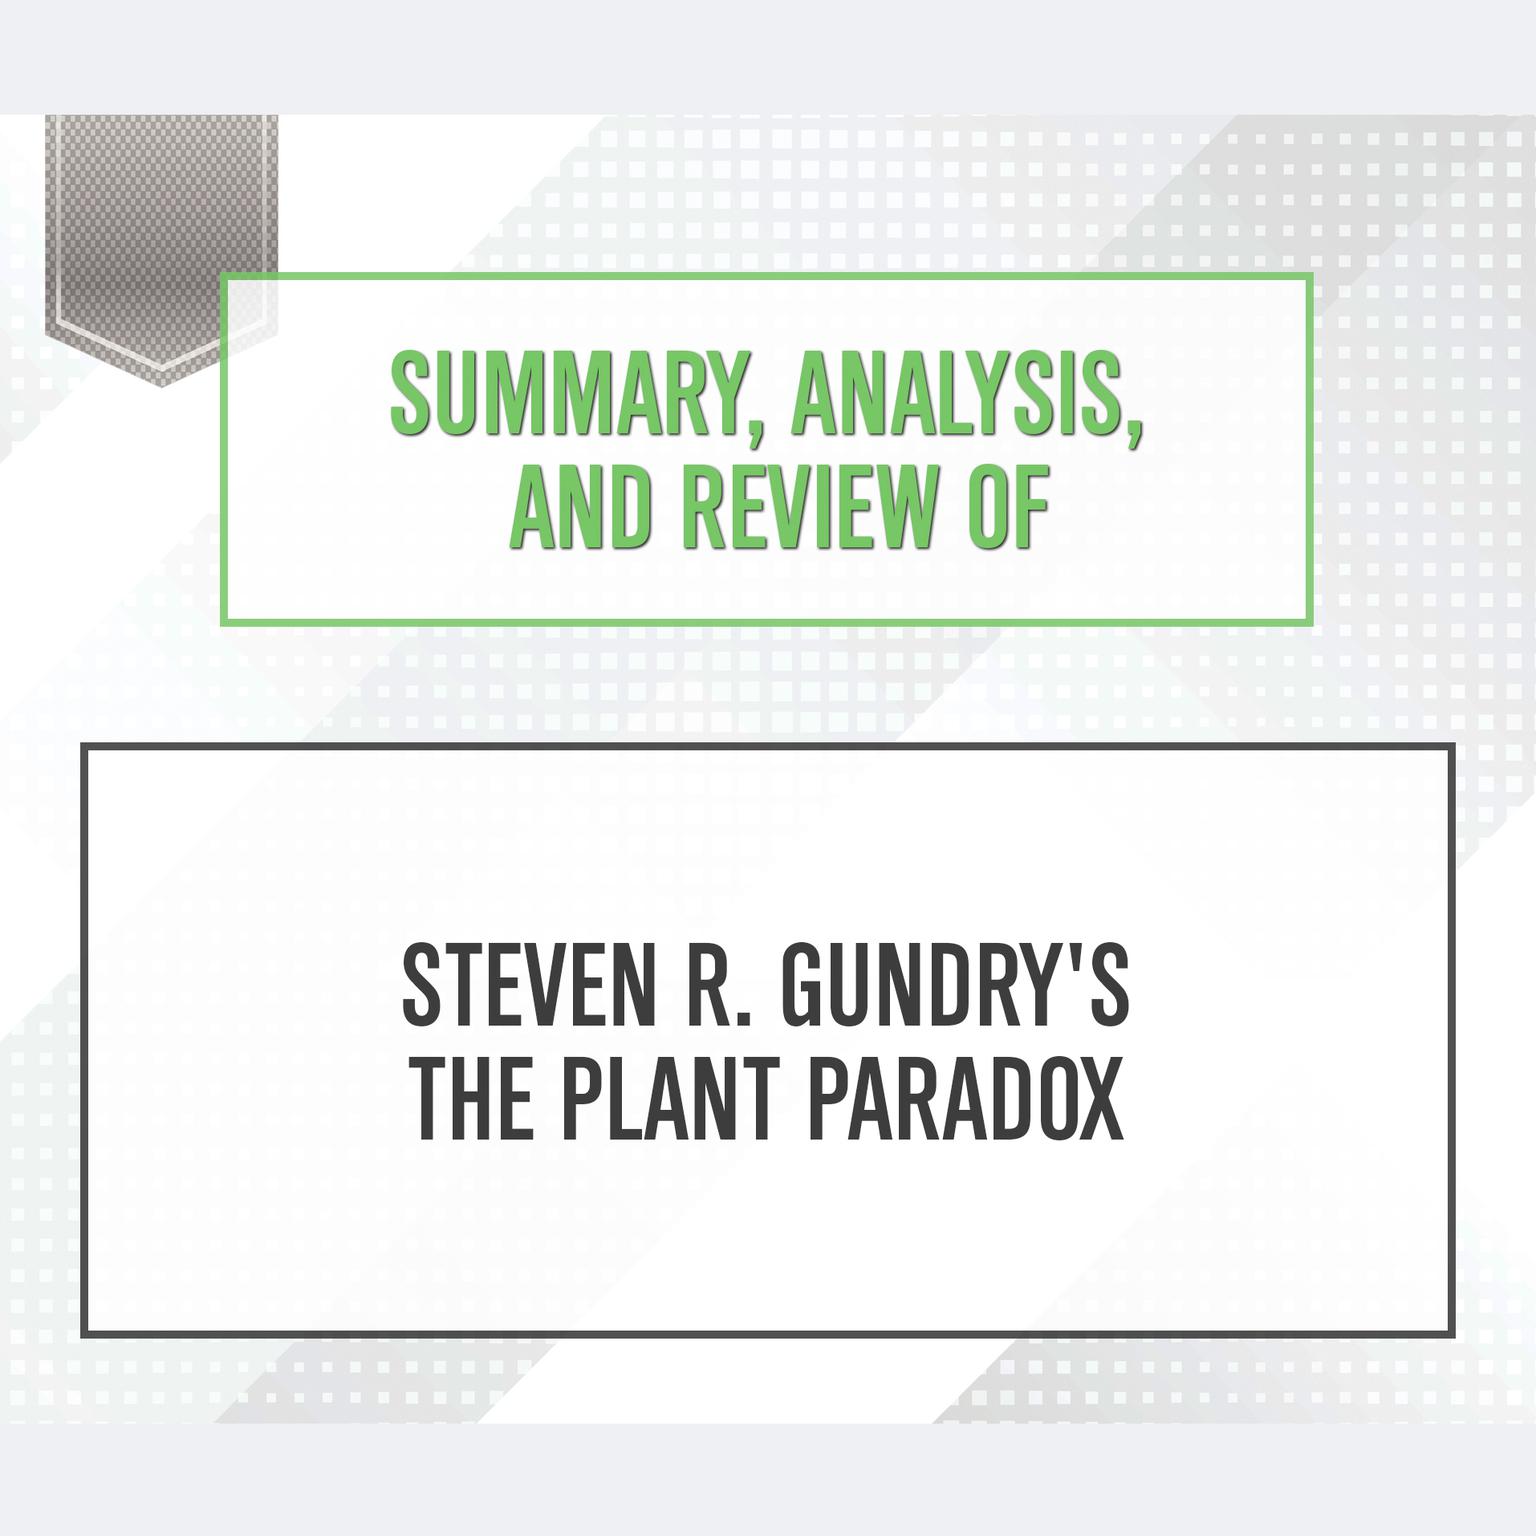 Summary, Analysis, and Review of Steven R. Gundrys The Plant Paradox Audiobook, by Start Publishing Notes